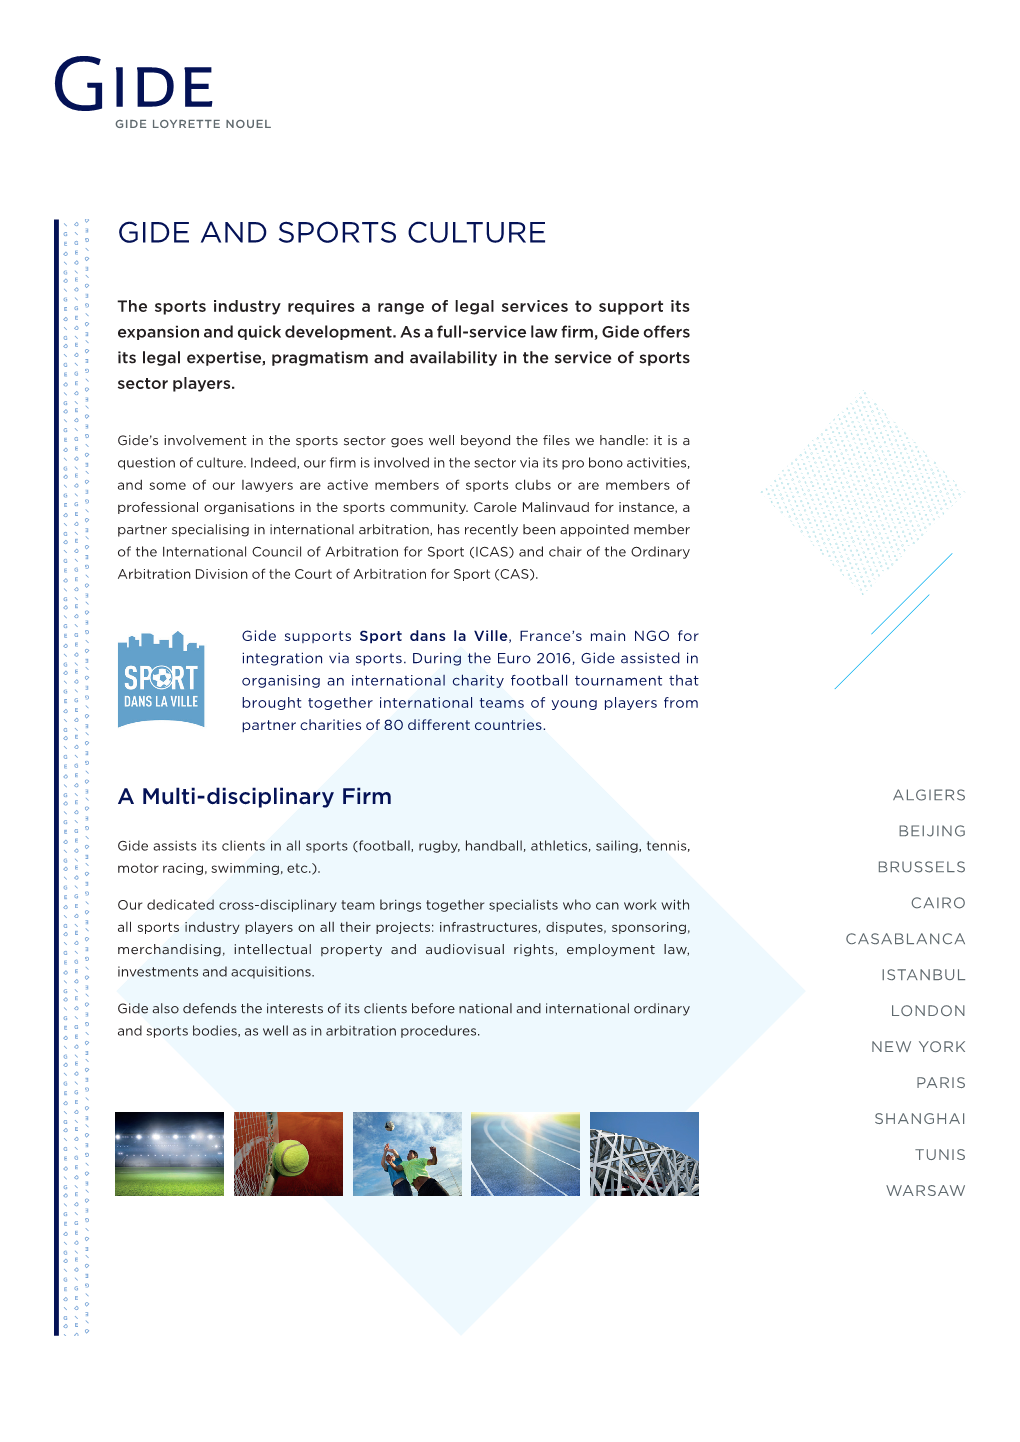 Gide and Sports Culture